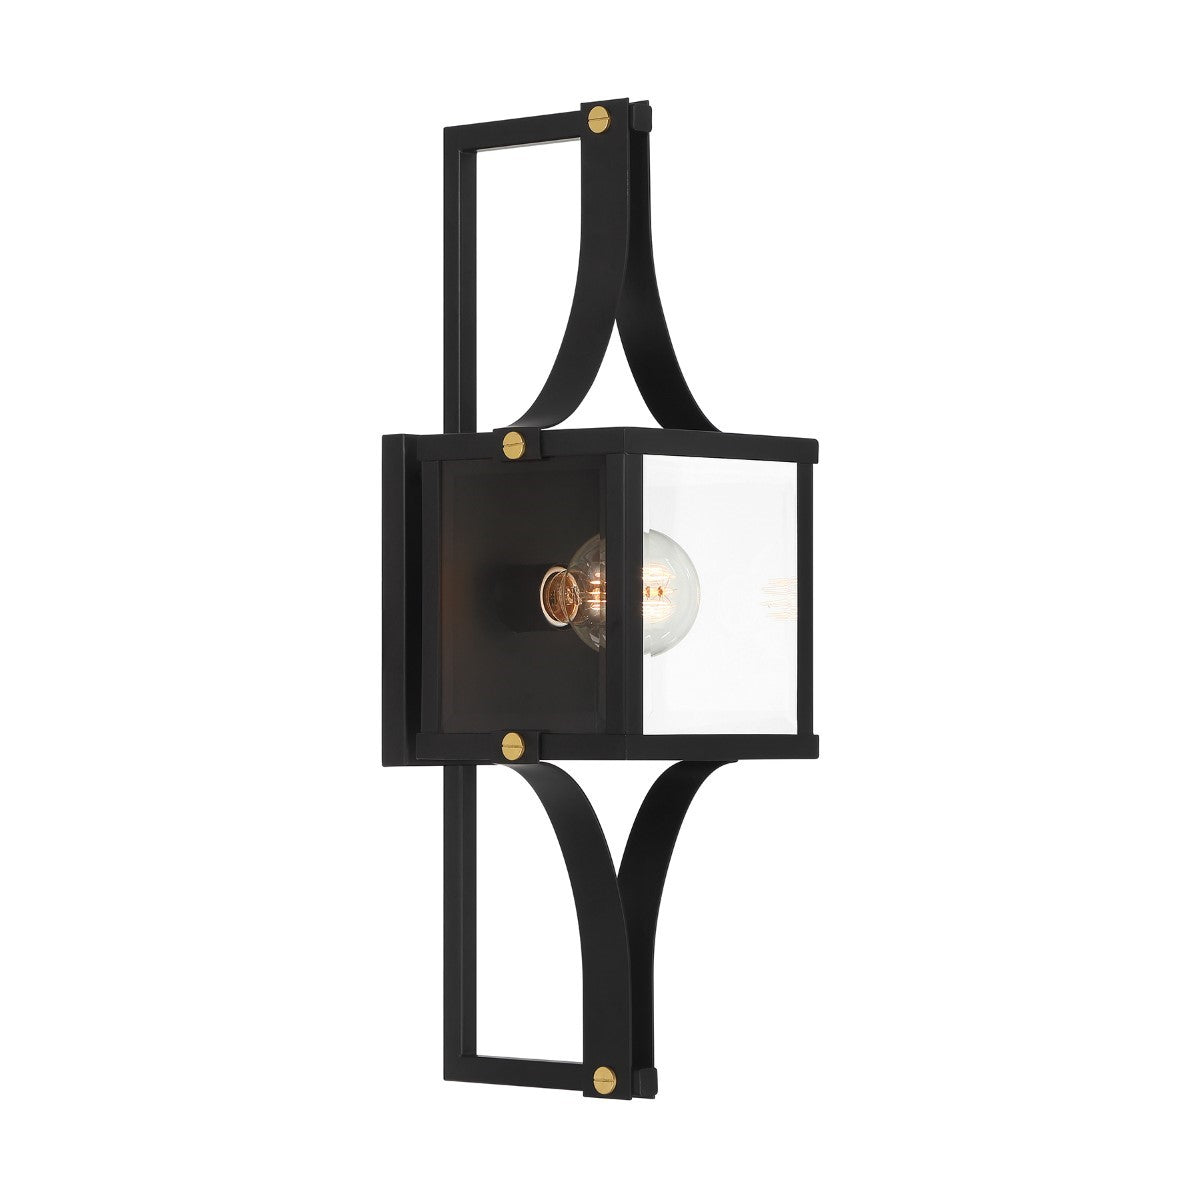 Raeburn 23 in. Outdoor Wall Lantern Matte Black and Weathered Brushed Brass Finish - Bees Lighting